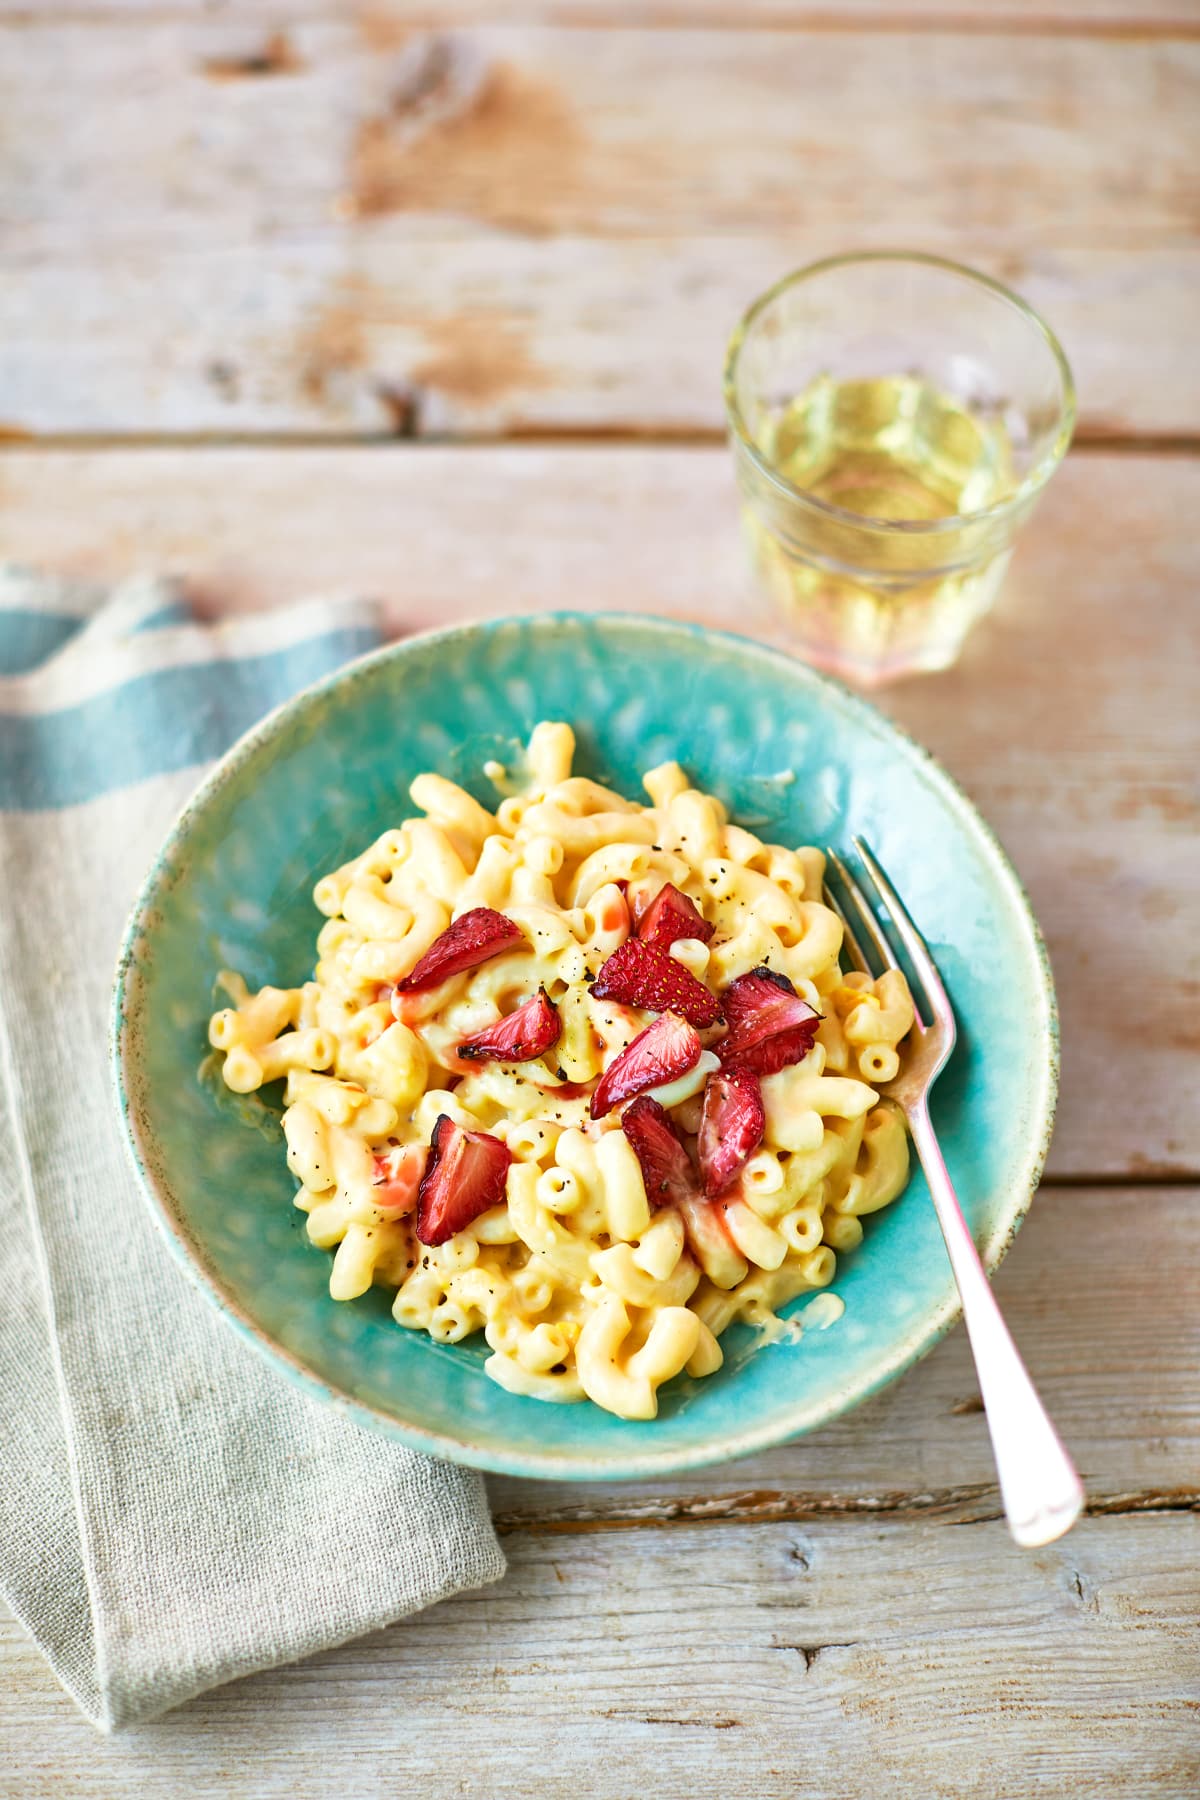 A turquoise bowl of strawberry pasta: macaroni in a cheese and butternut squash sauce, topped with roasted balsamic strawberries. A fork rests in the bowl by a glass of juice. The bowl sits on a tea towel on a wooden background.